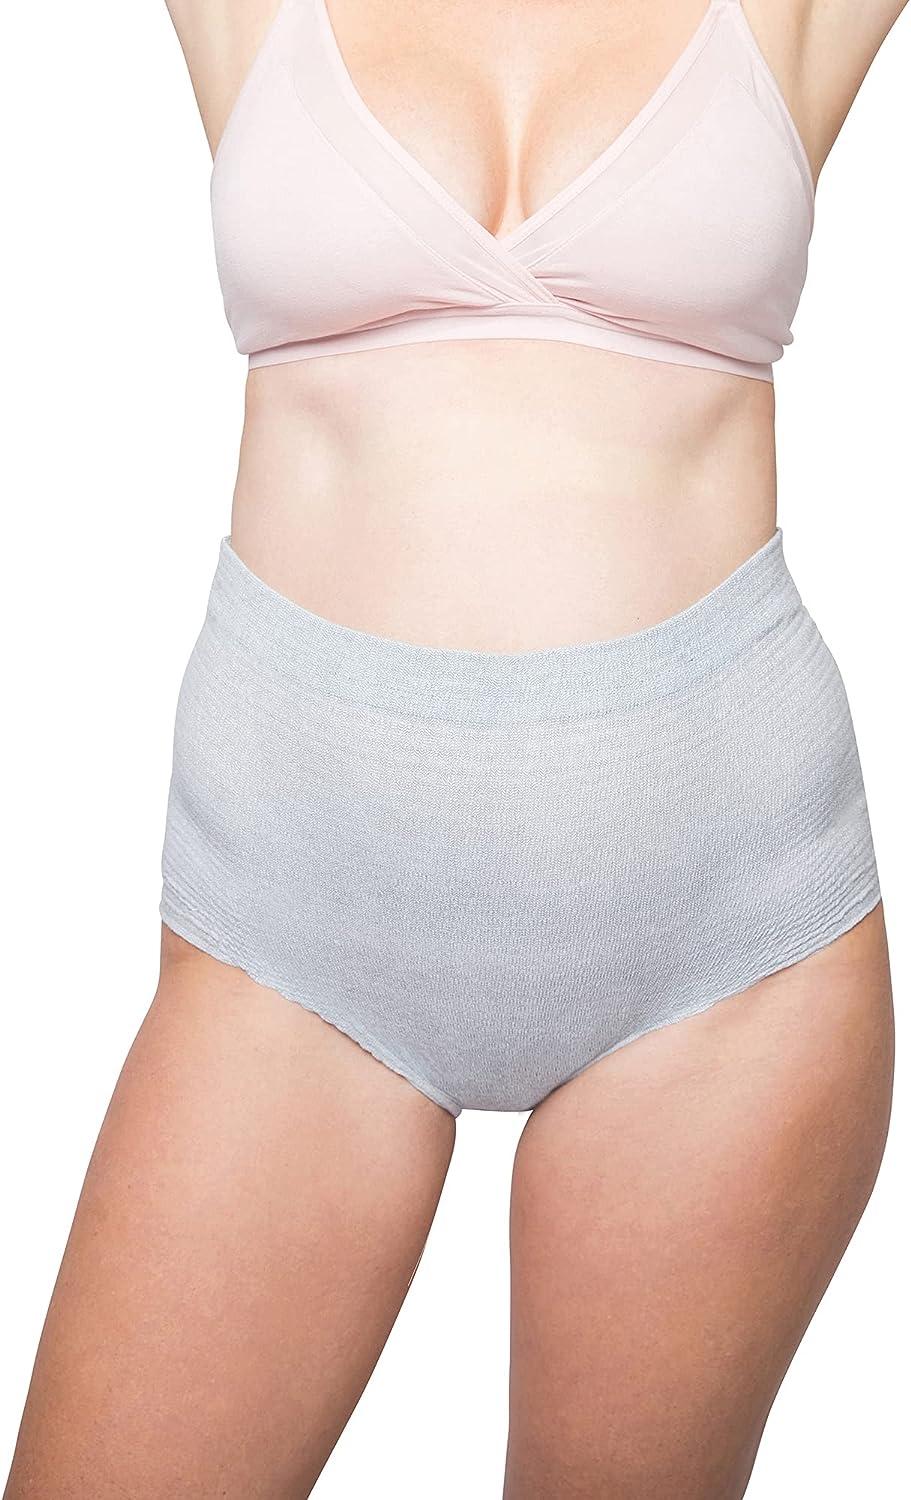 Frida Mom Disposable High Waist C-Section Postpartum Underwear by Frida Mom  Super Soft, Stretchy, Breathable, Wicking, Latex-Free - Size - Regular, 8  Count